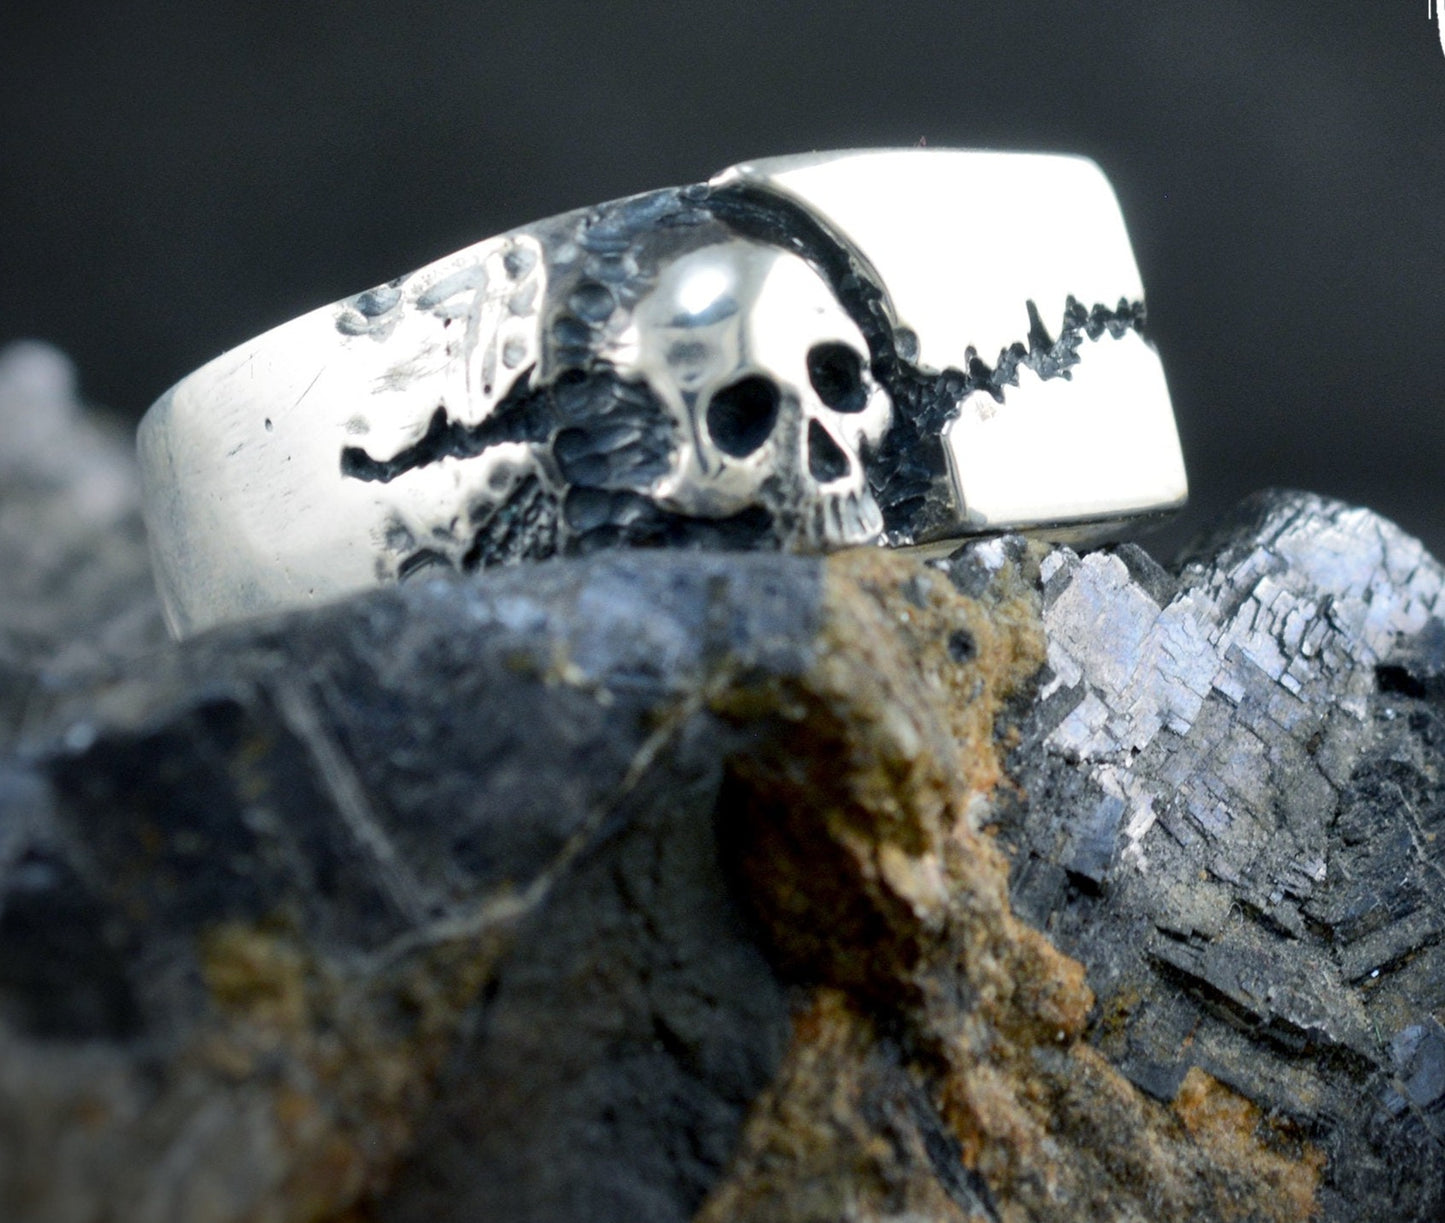 925 silver skull seal ring, Cracked rock texture seal ring, Mens jewelry, Handmade ring